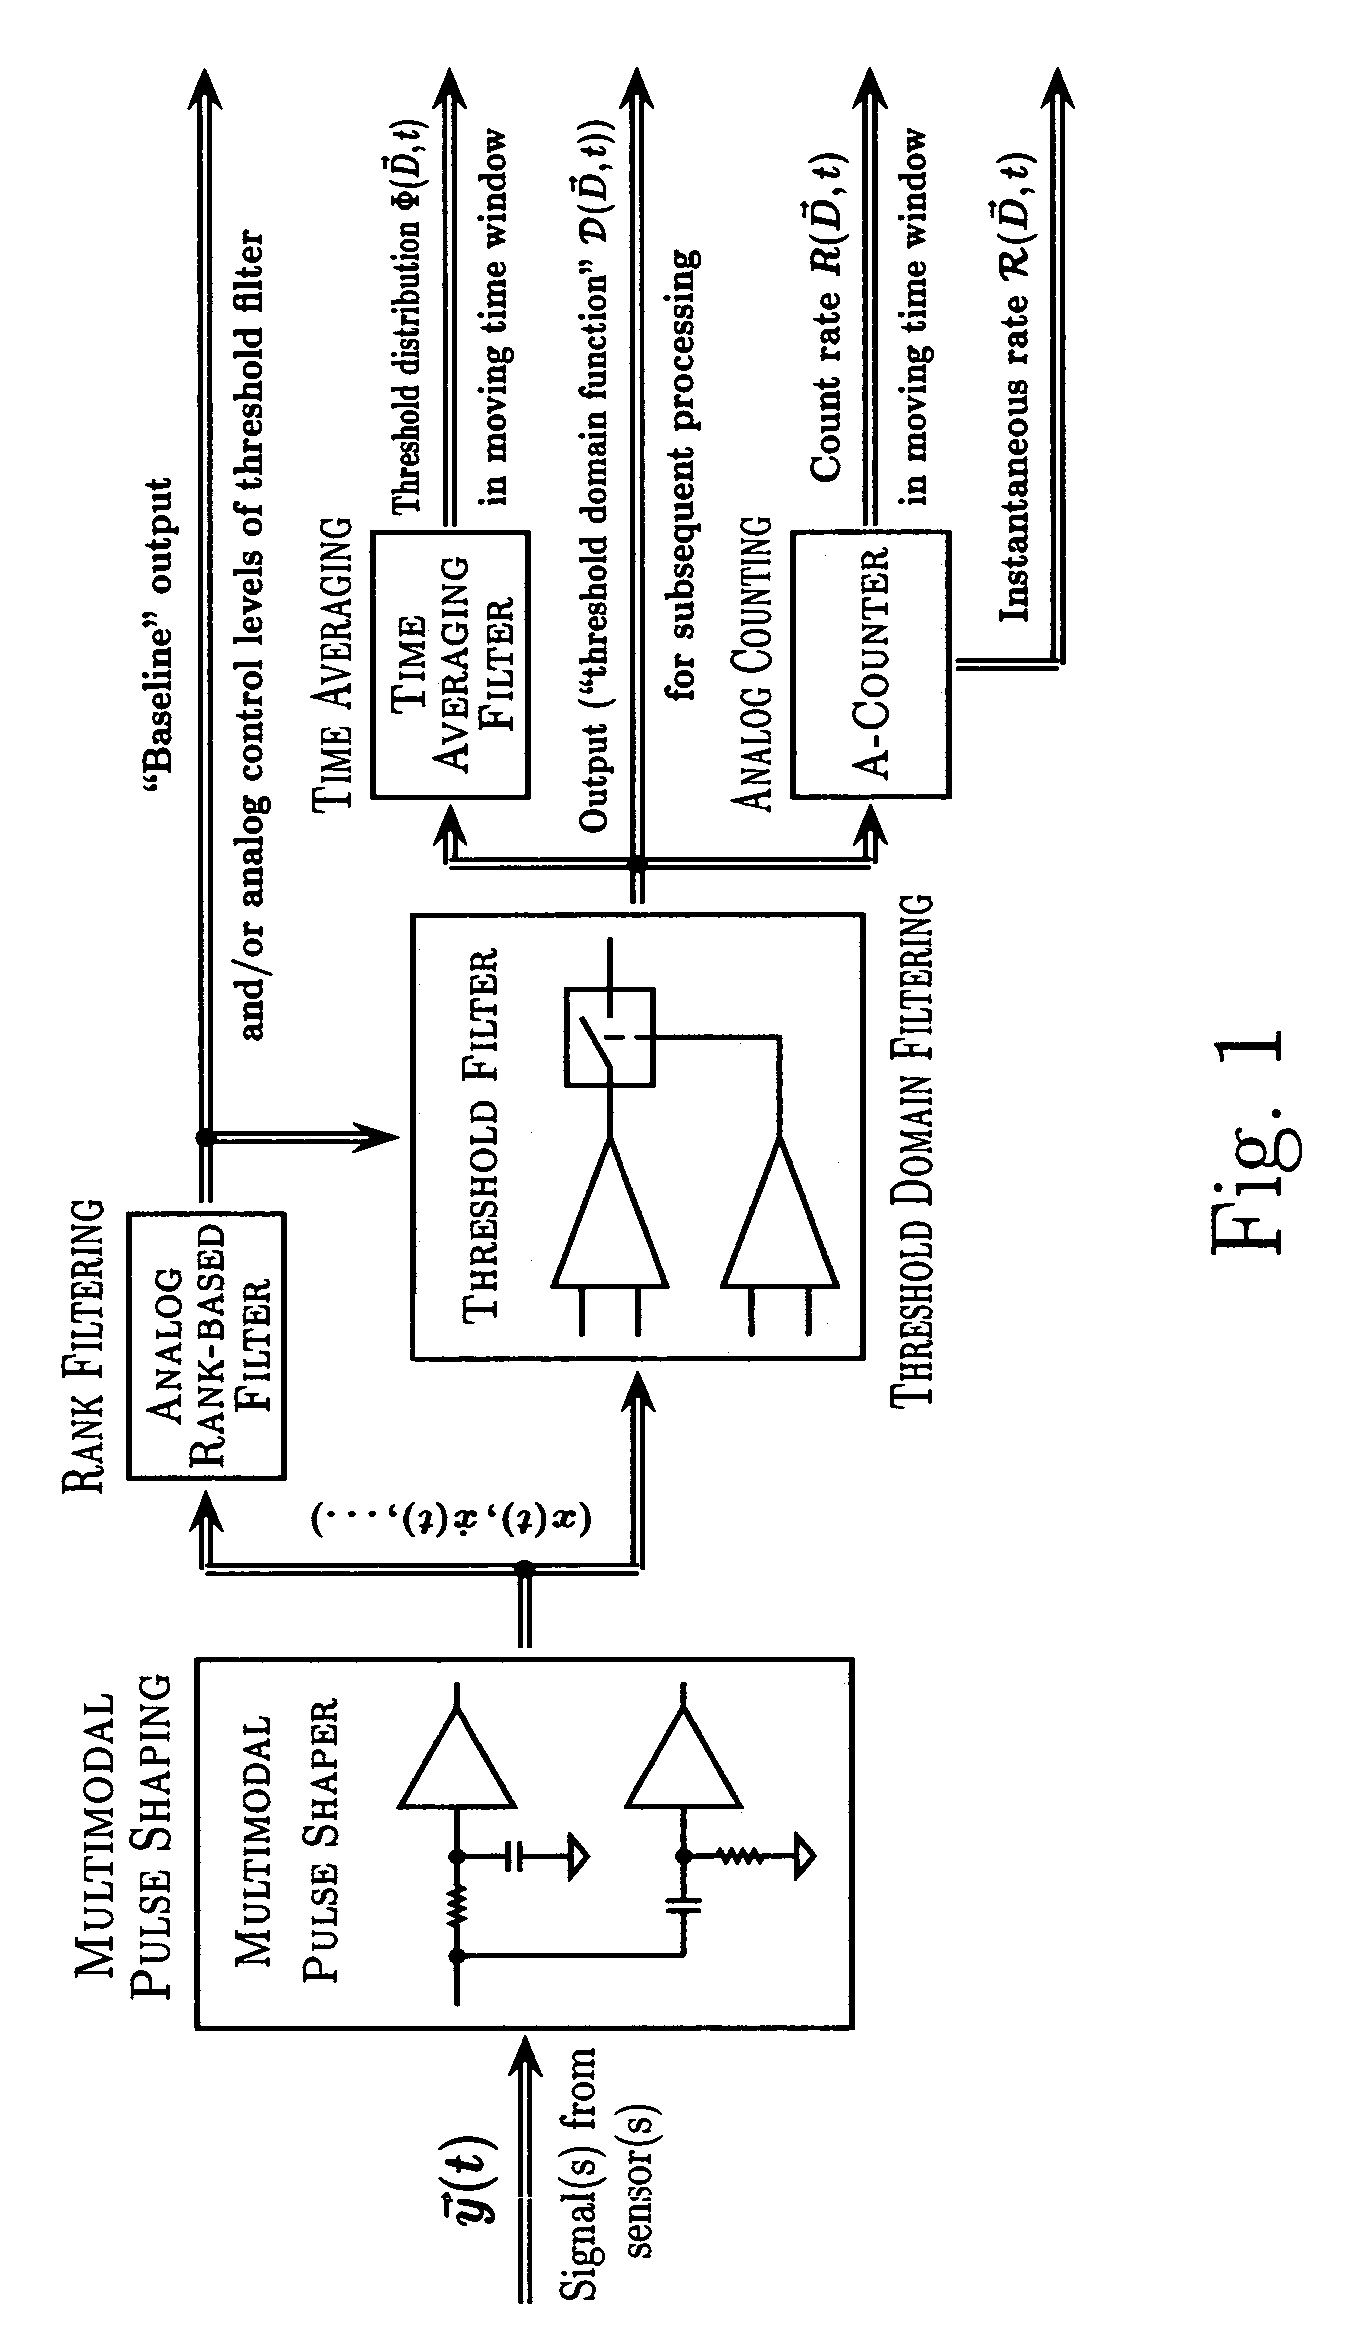 Method and apparatus for adaptive real-time signal conditioning, processing, analysis, quantification, comparision, and control